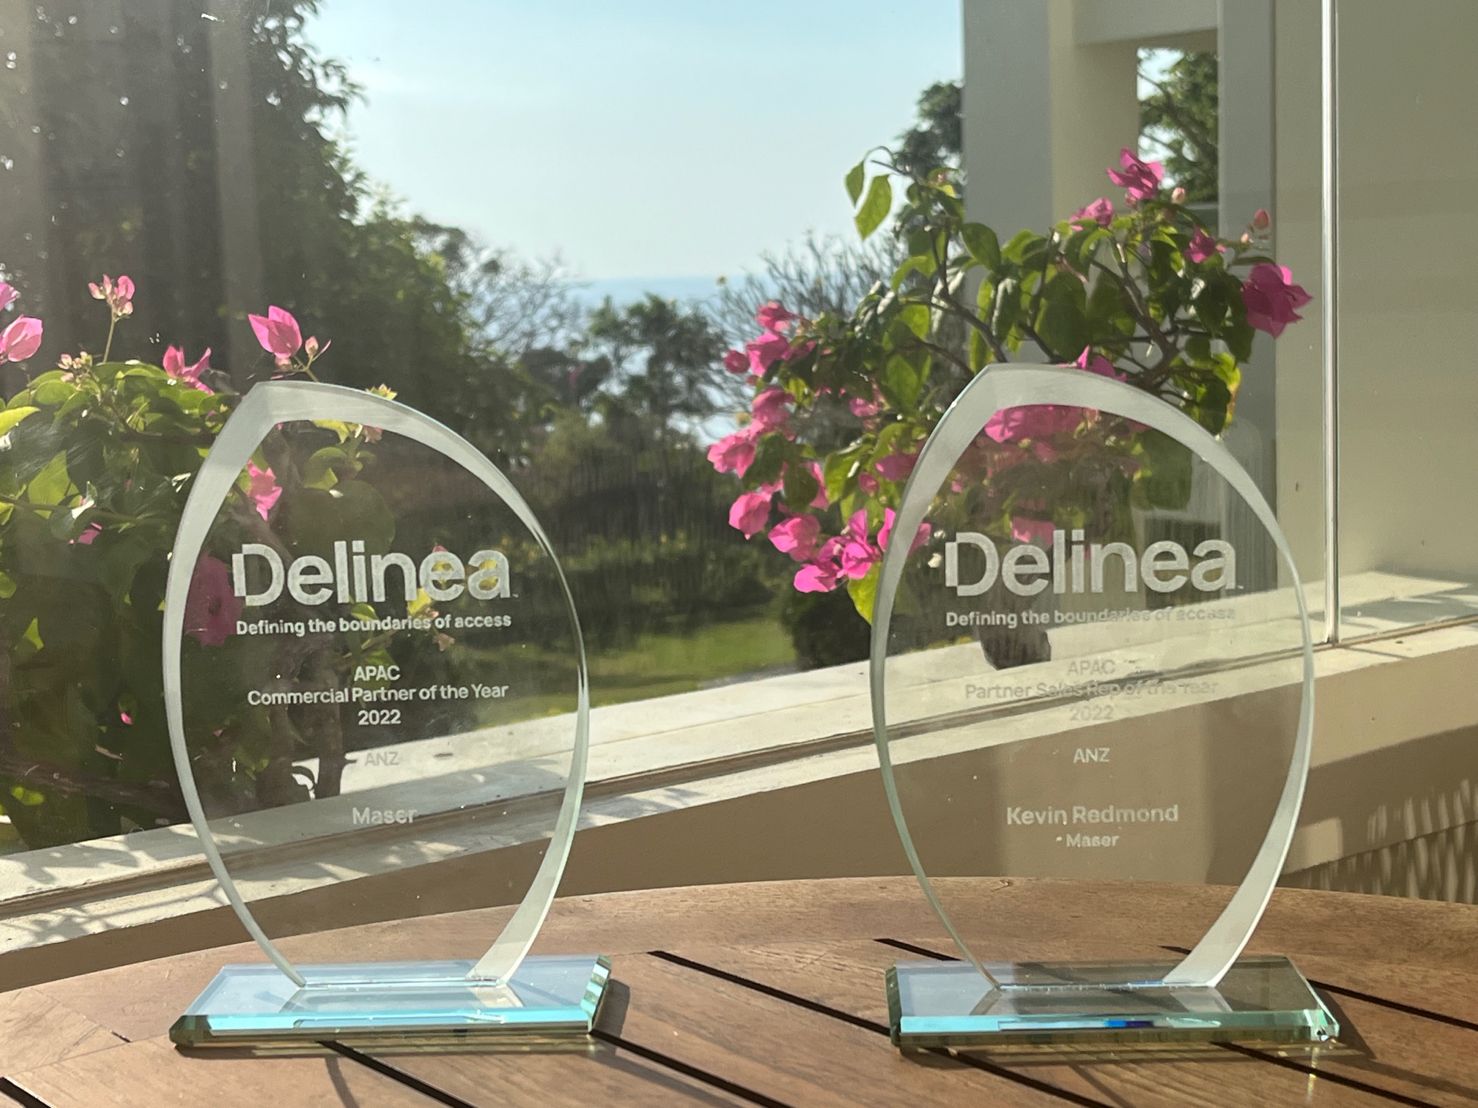 Maser awarded APAC Commercial Partner of the Year 2022 ANZ for Delinea